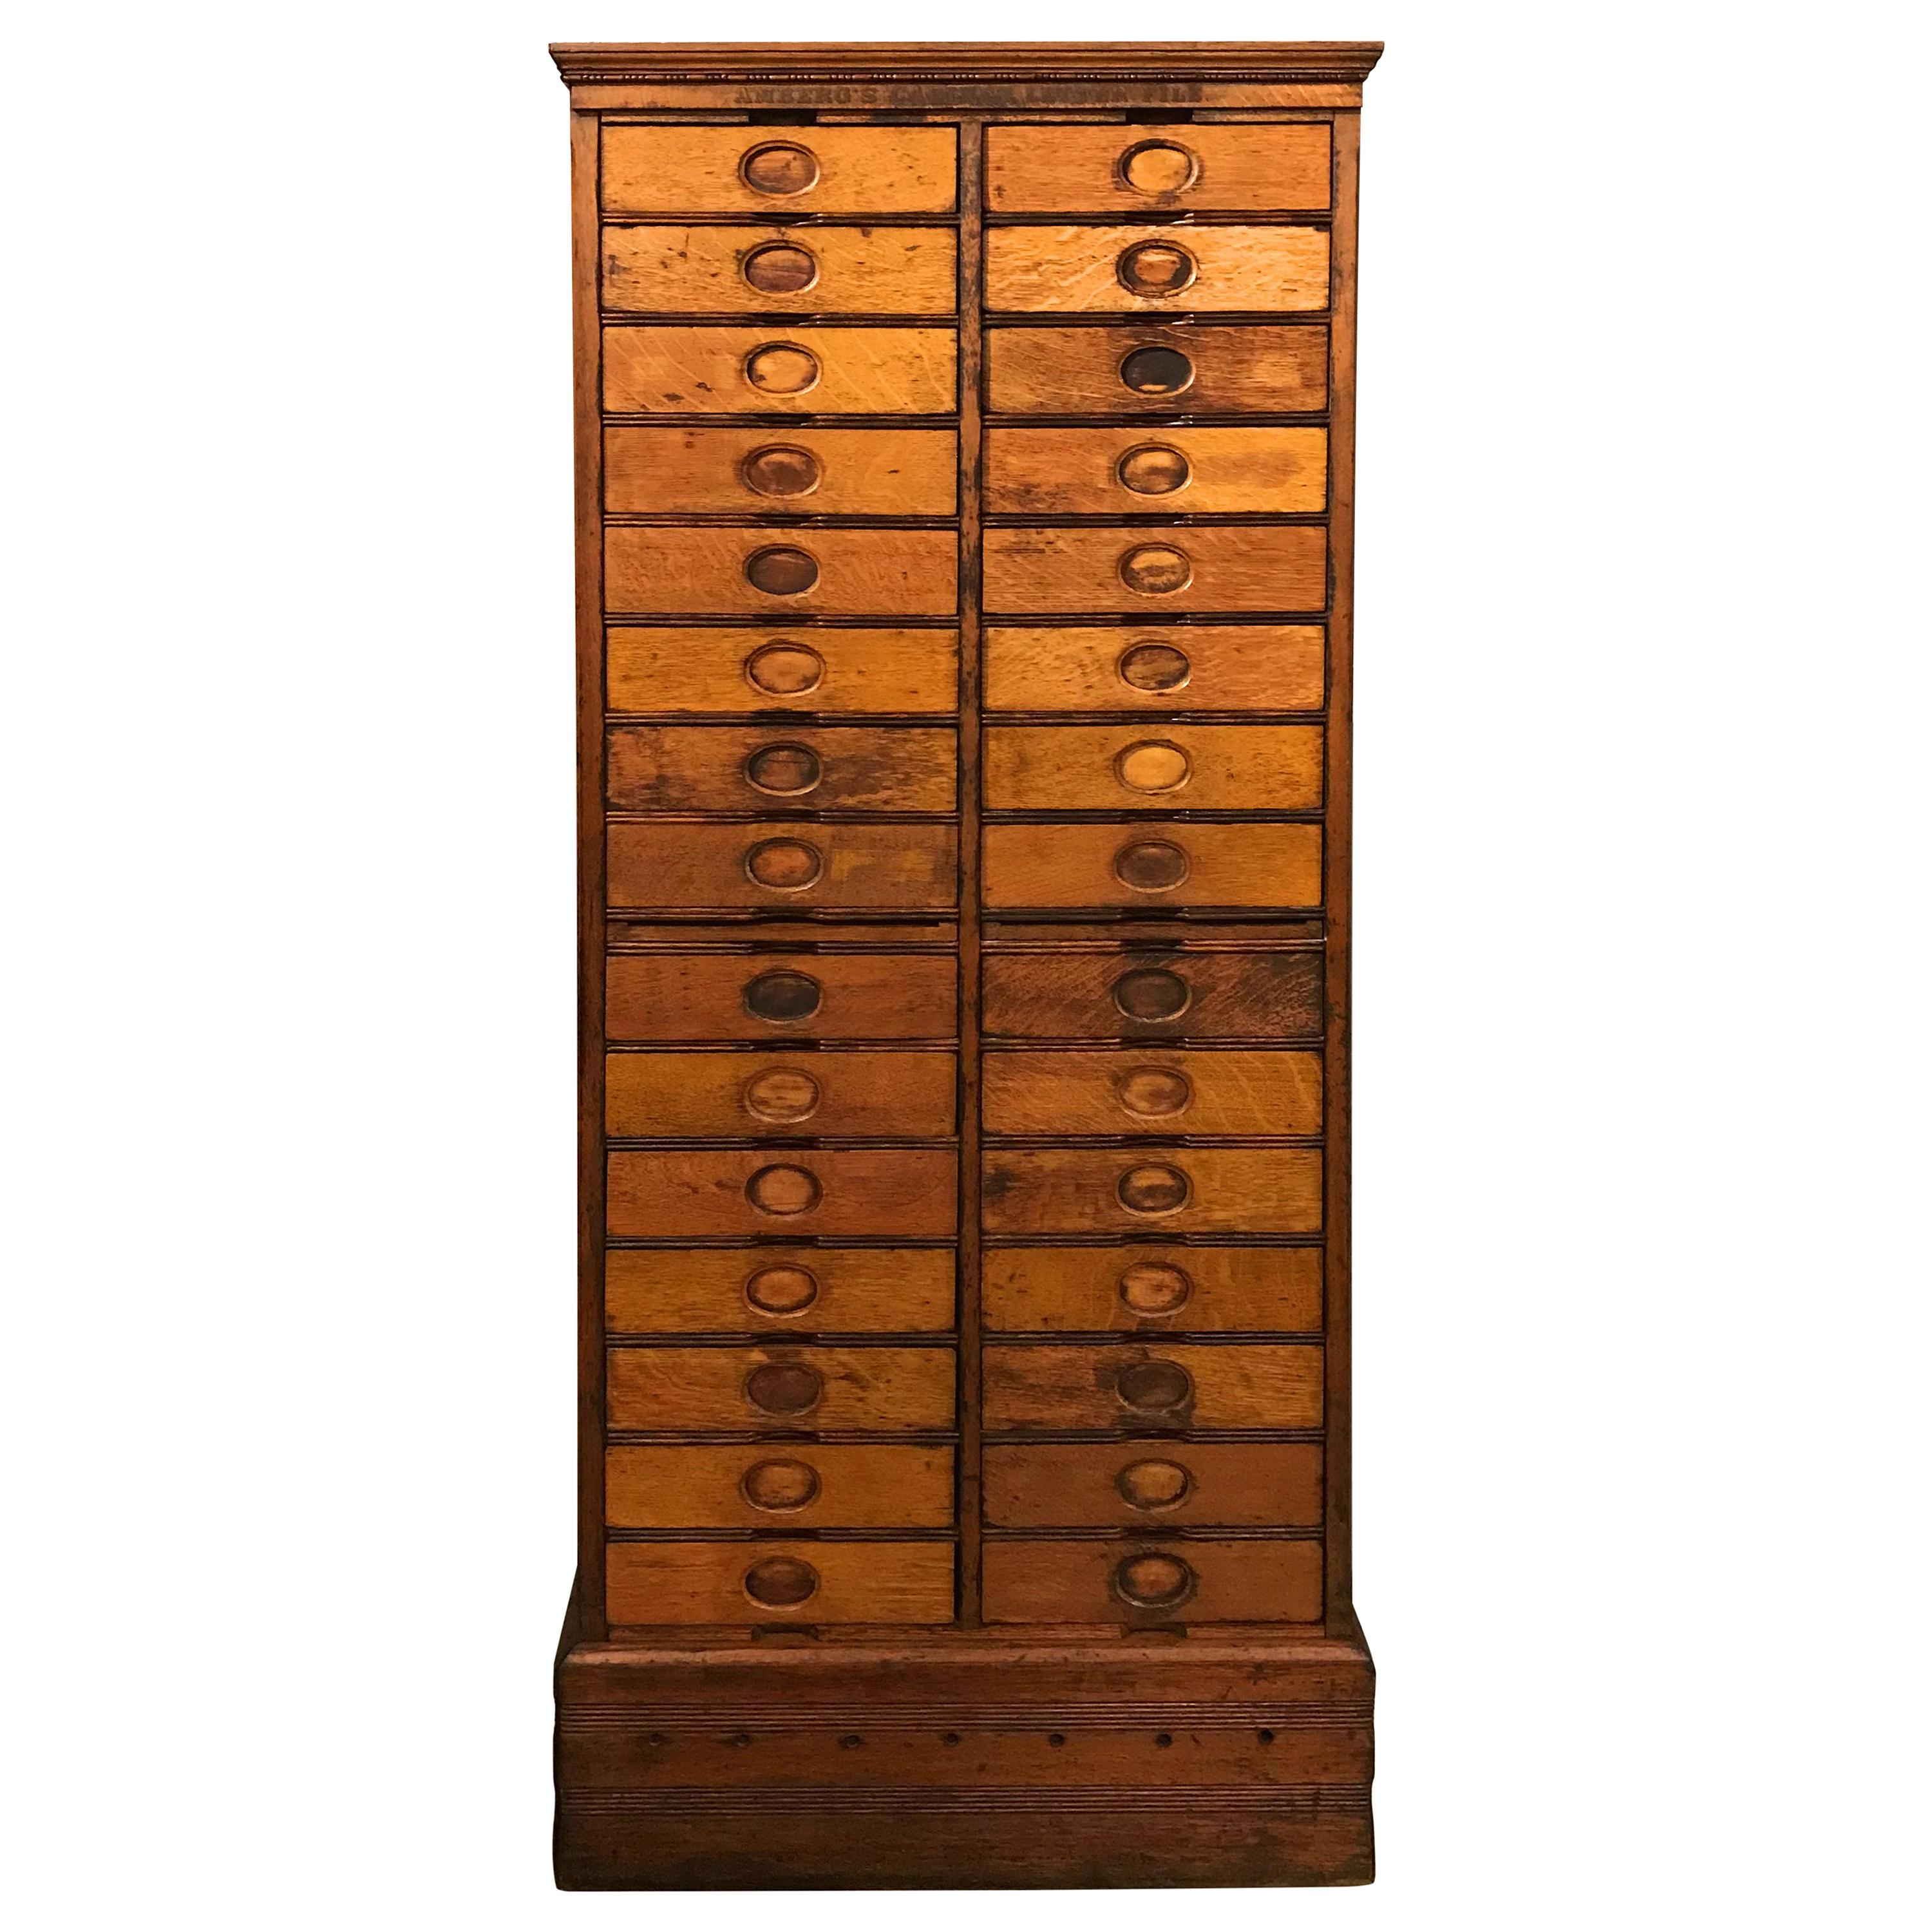 Amberg’s Imperial Letter File Multi-Drawer Cabinet, circa 1920